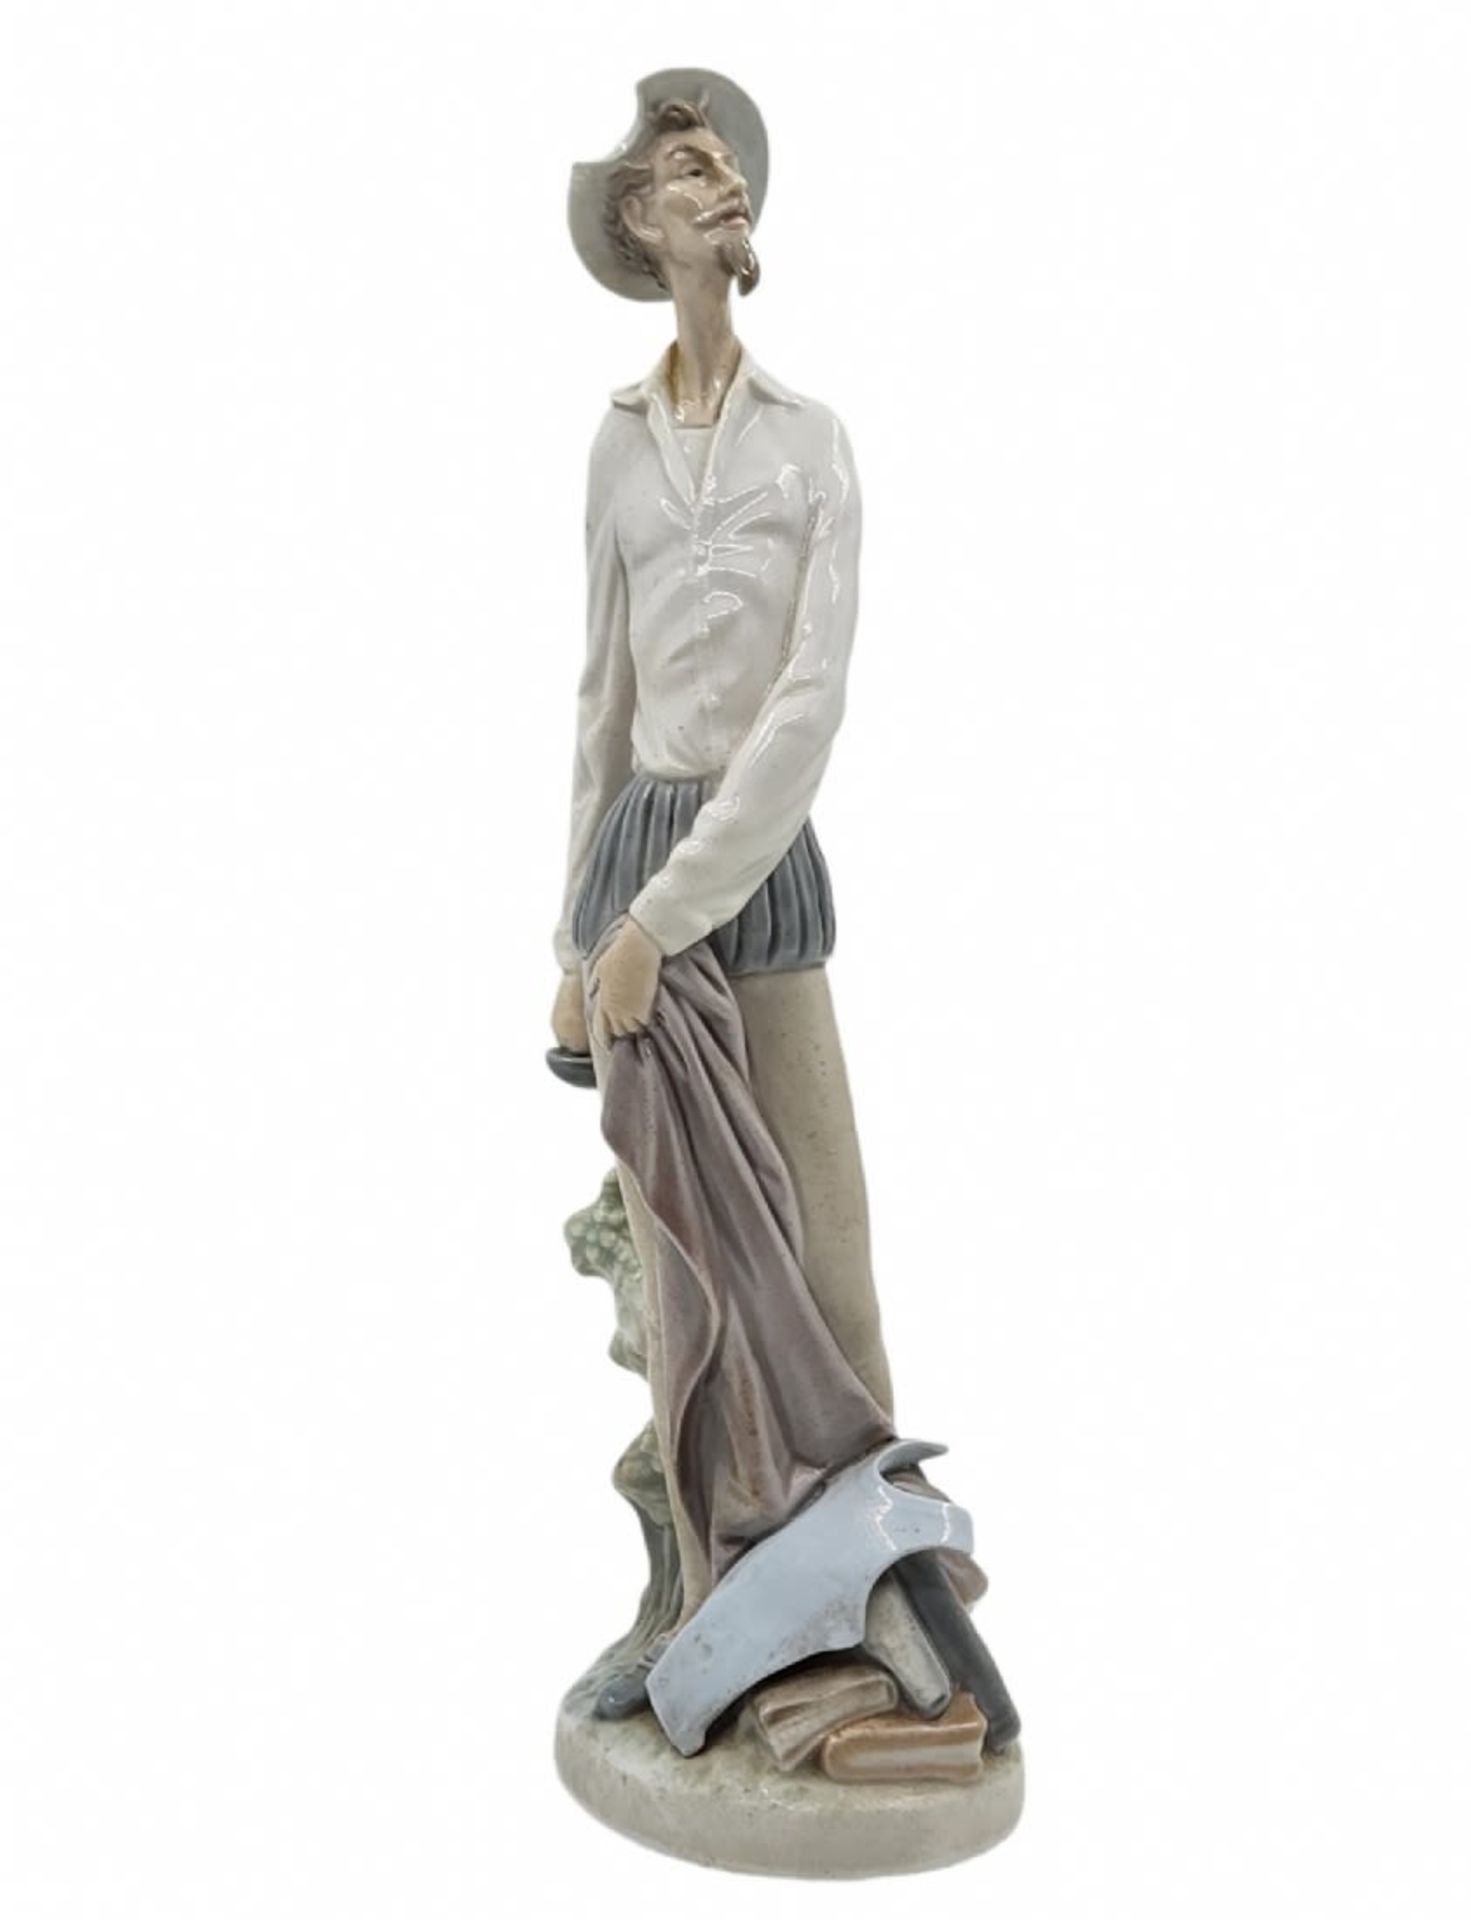 Spanish porcelain figurine made by 'Lladro', in the image of Don Quixote, decorated with hand